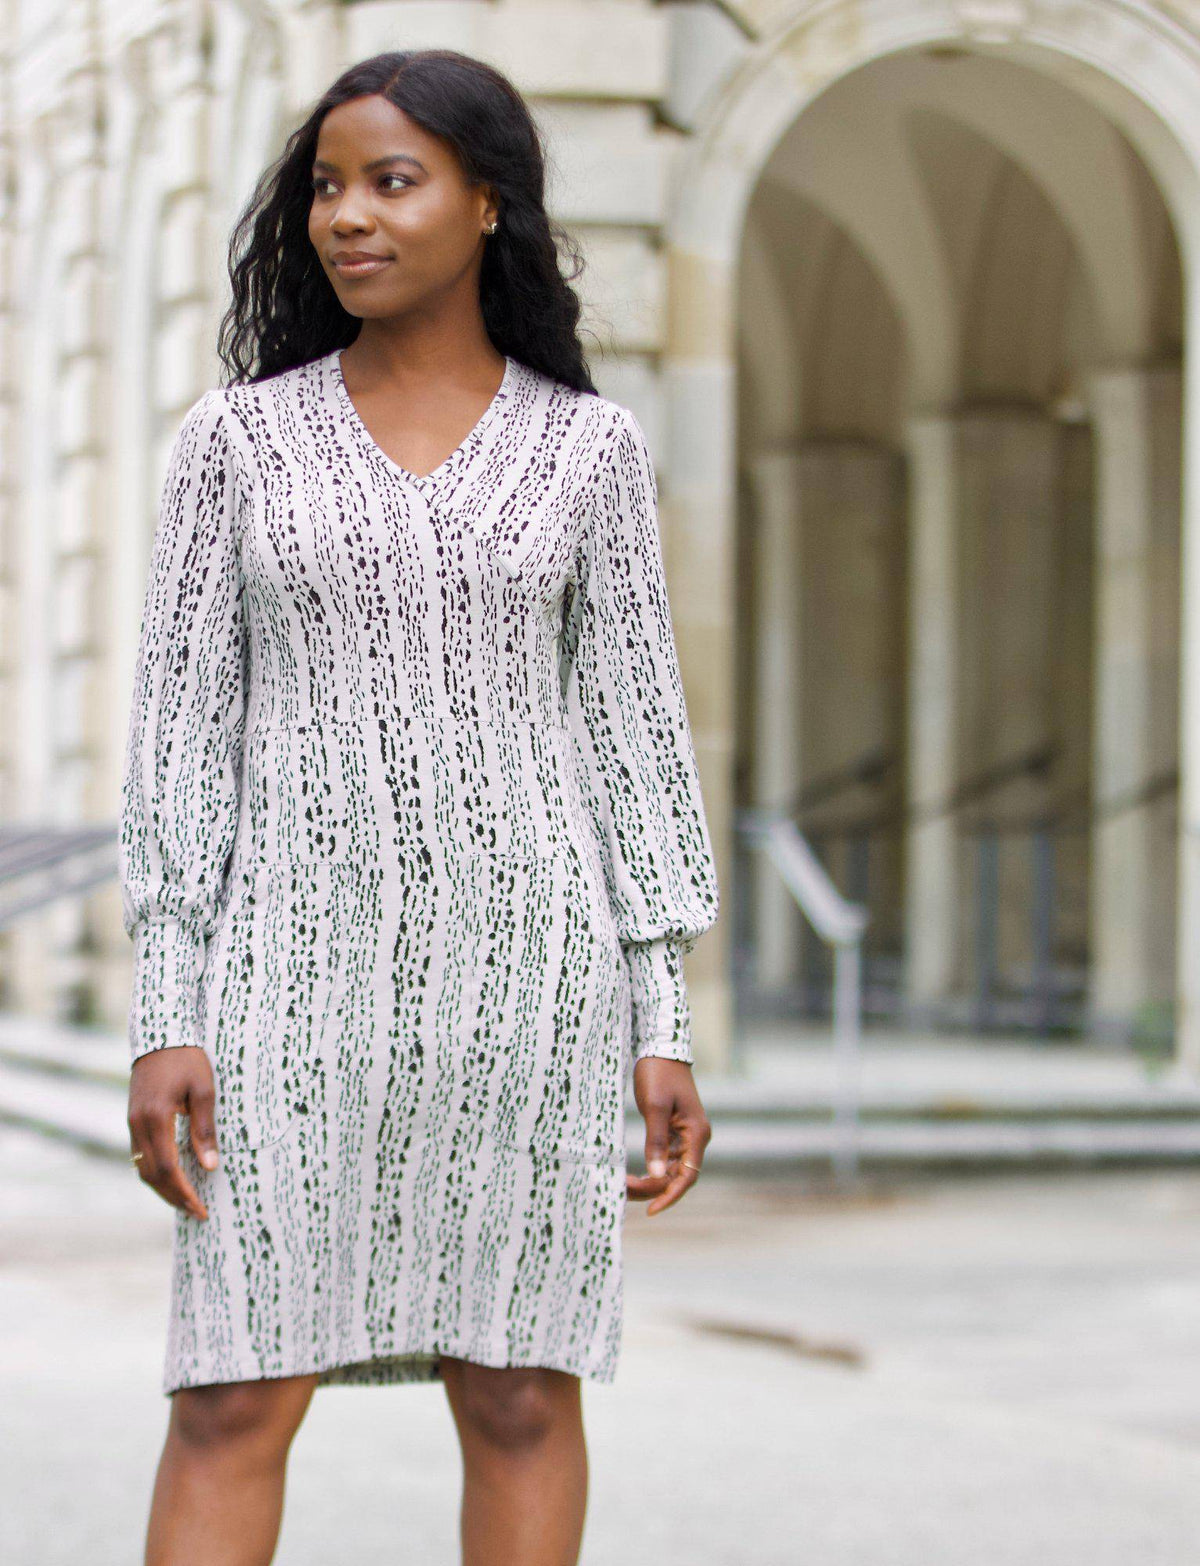 Marble Organic Dress by Passion Lilie